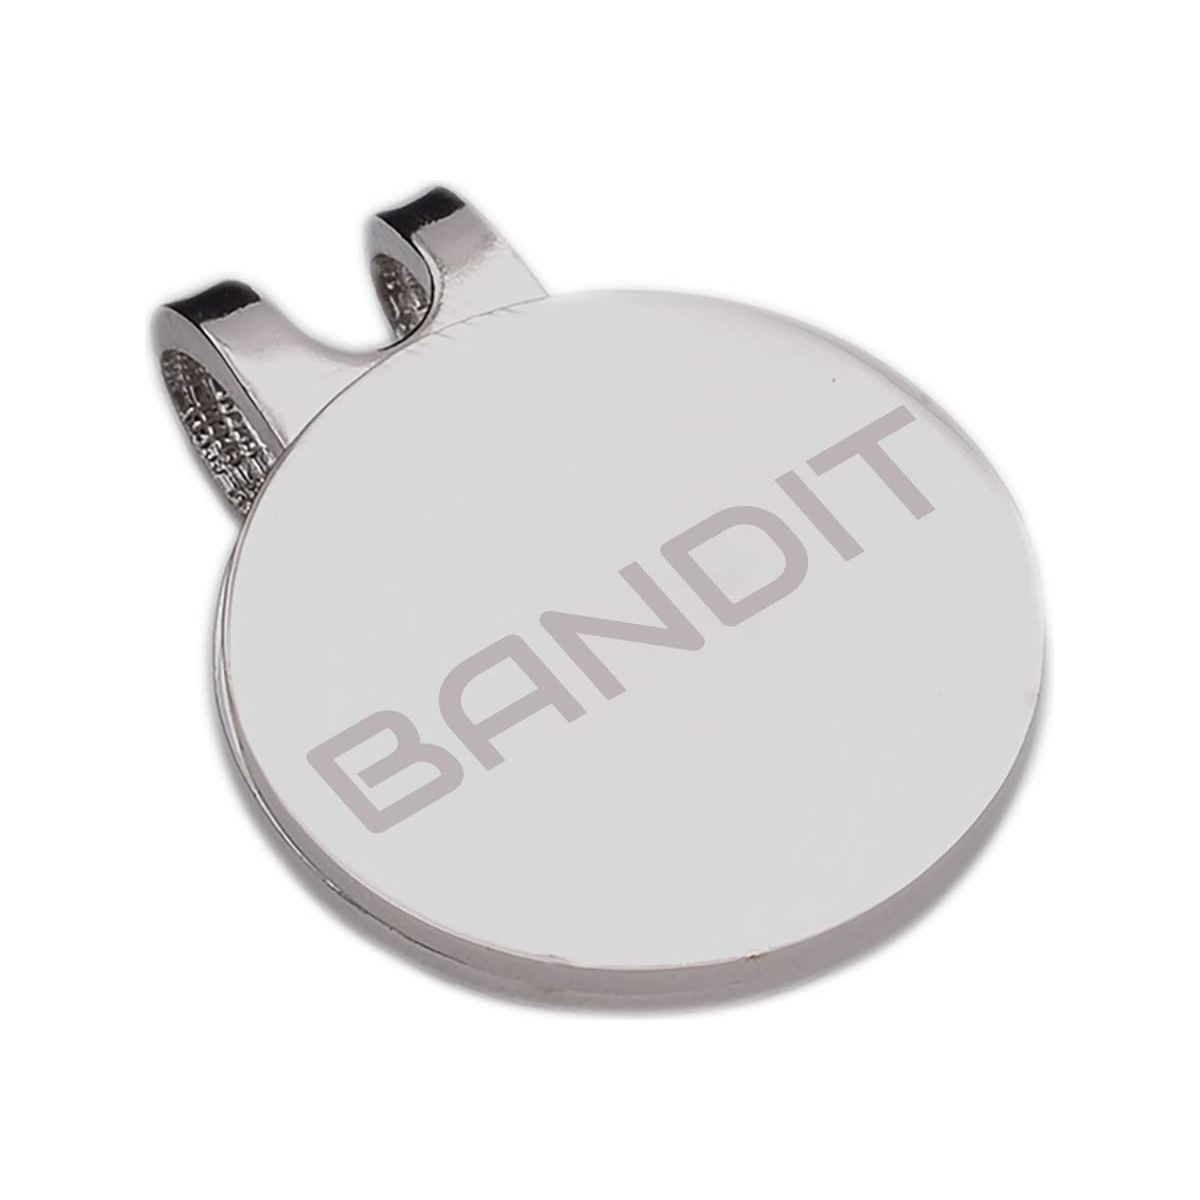 Bandit Magnetic Golf Ball Marker and Hat Clip - Ashton and Finch